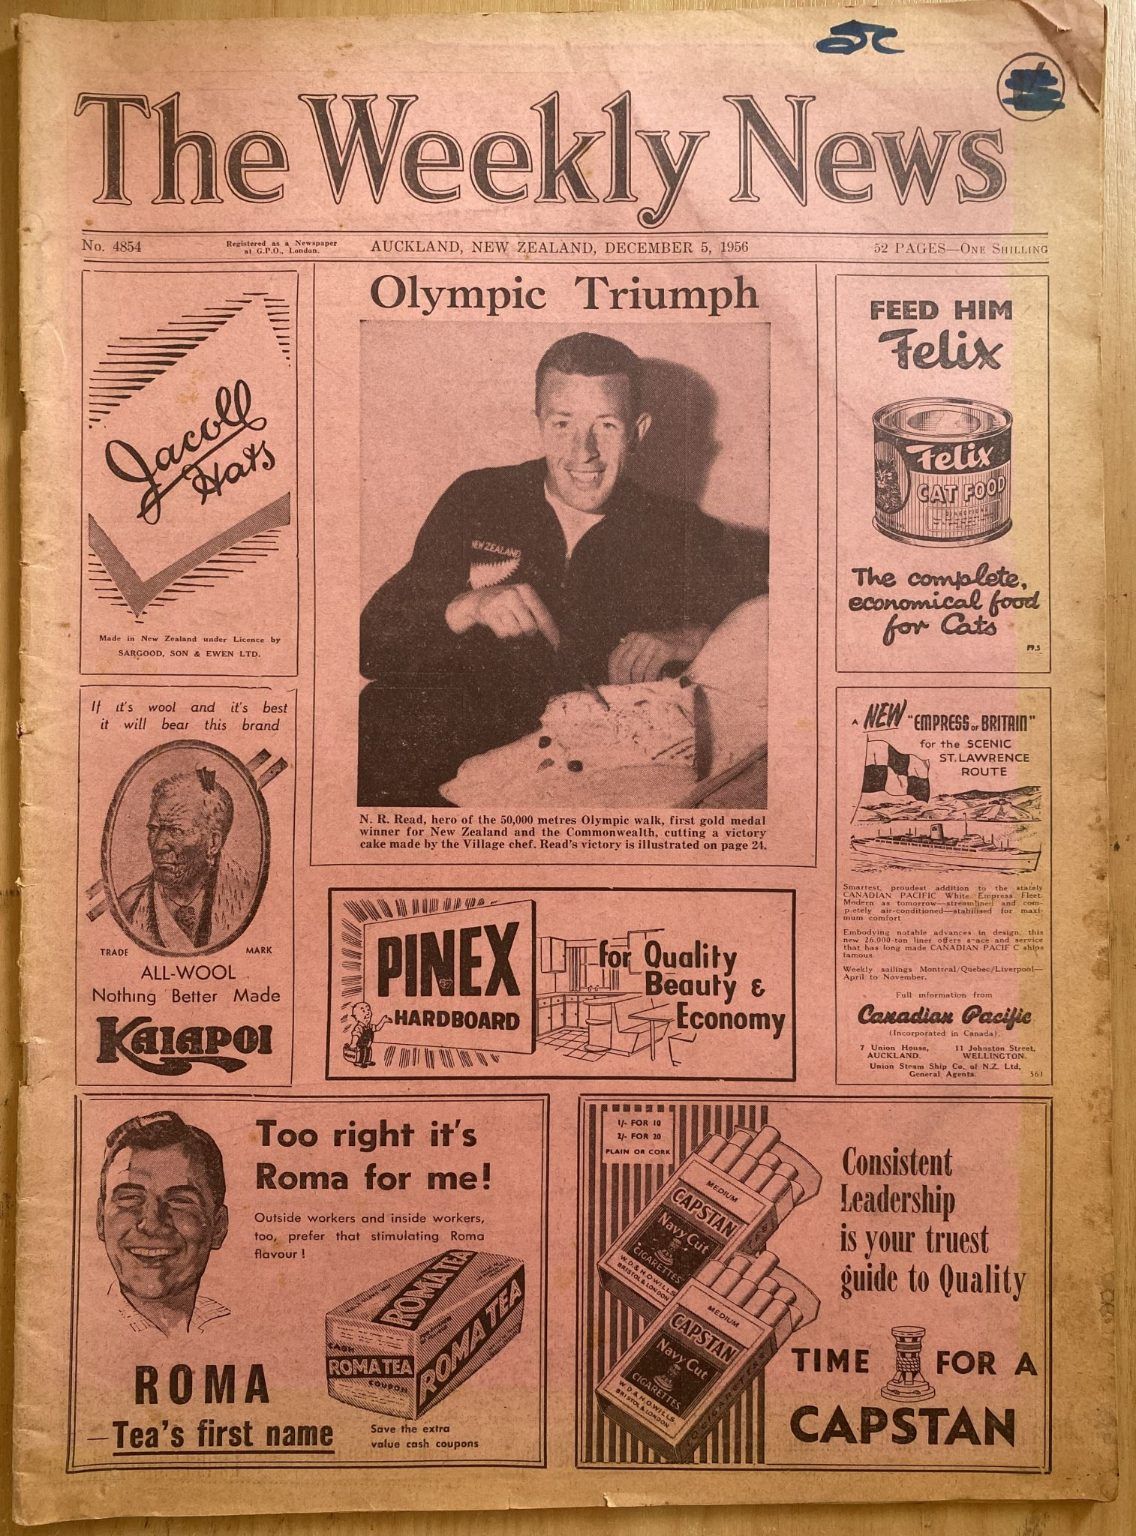 OLD NEWSPAPER: The Weekly News - No. 4854, 5 December 1956